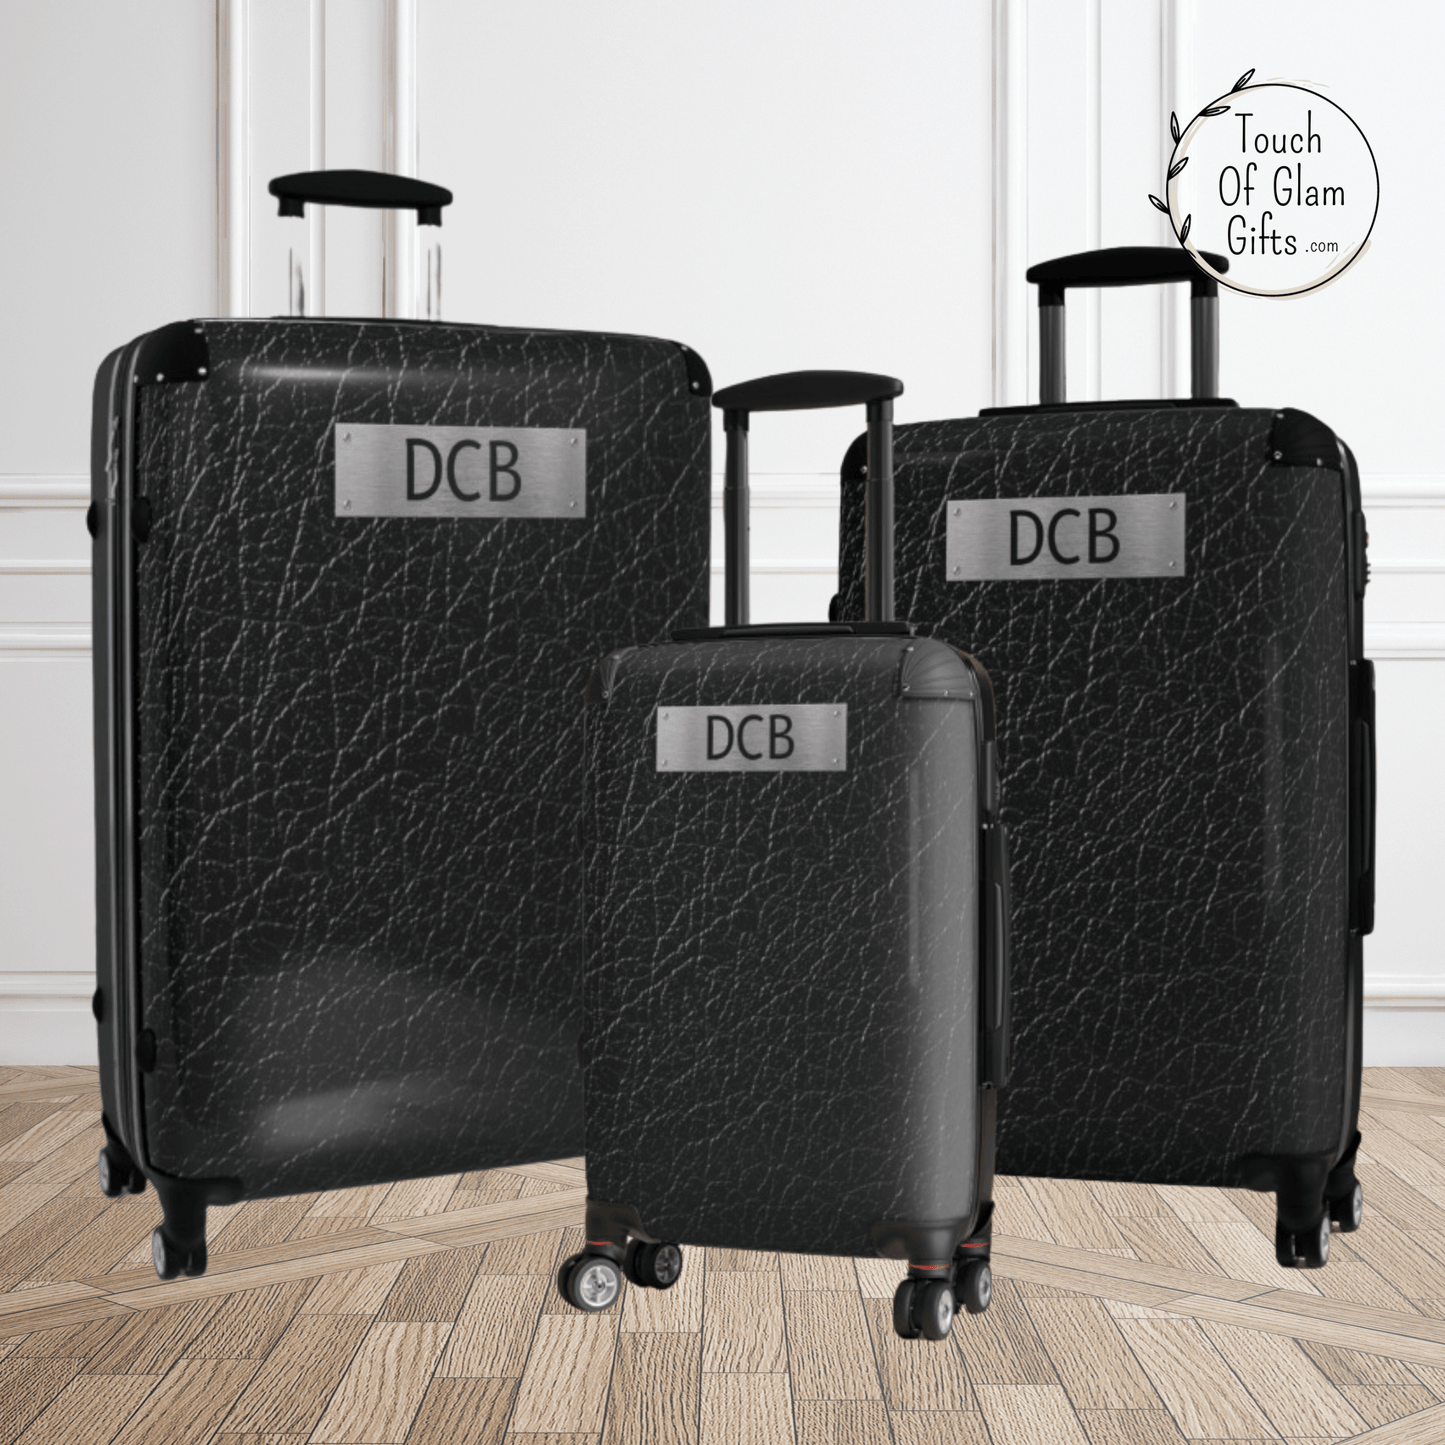 Custom Monogramed Luggage For Men #1, Black Leather & Silver Name Plate